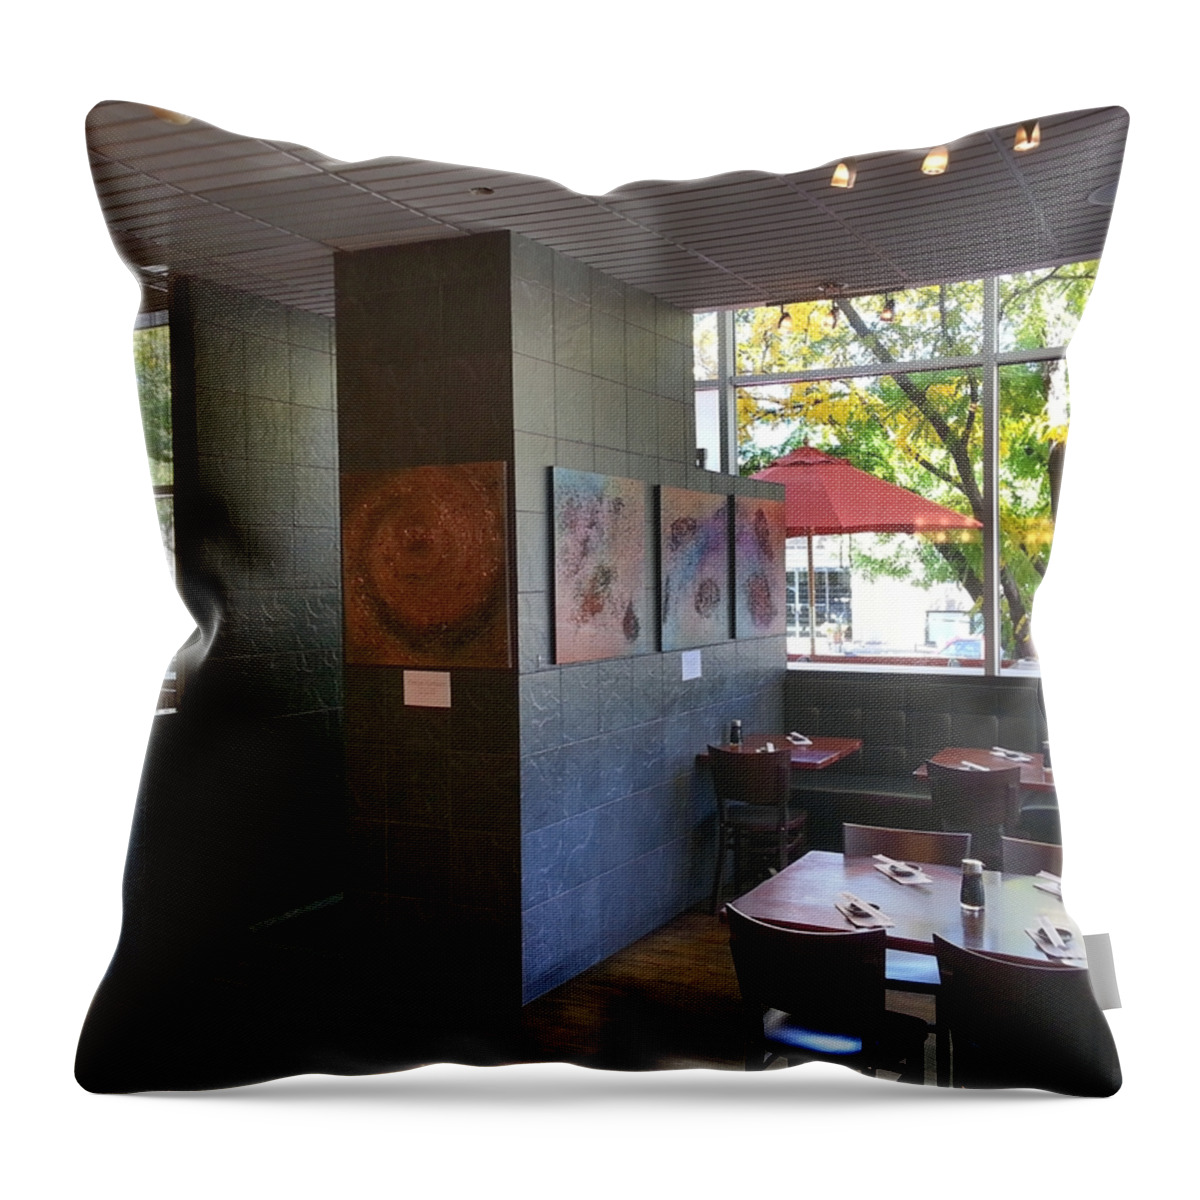  Throw Pillow featuring the mixed media Hapa Sushi Cherry Creek 2 by Angelina Tamez